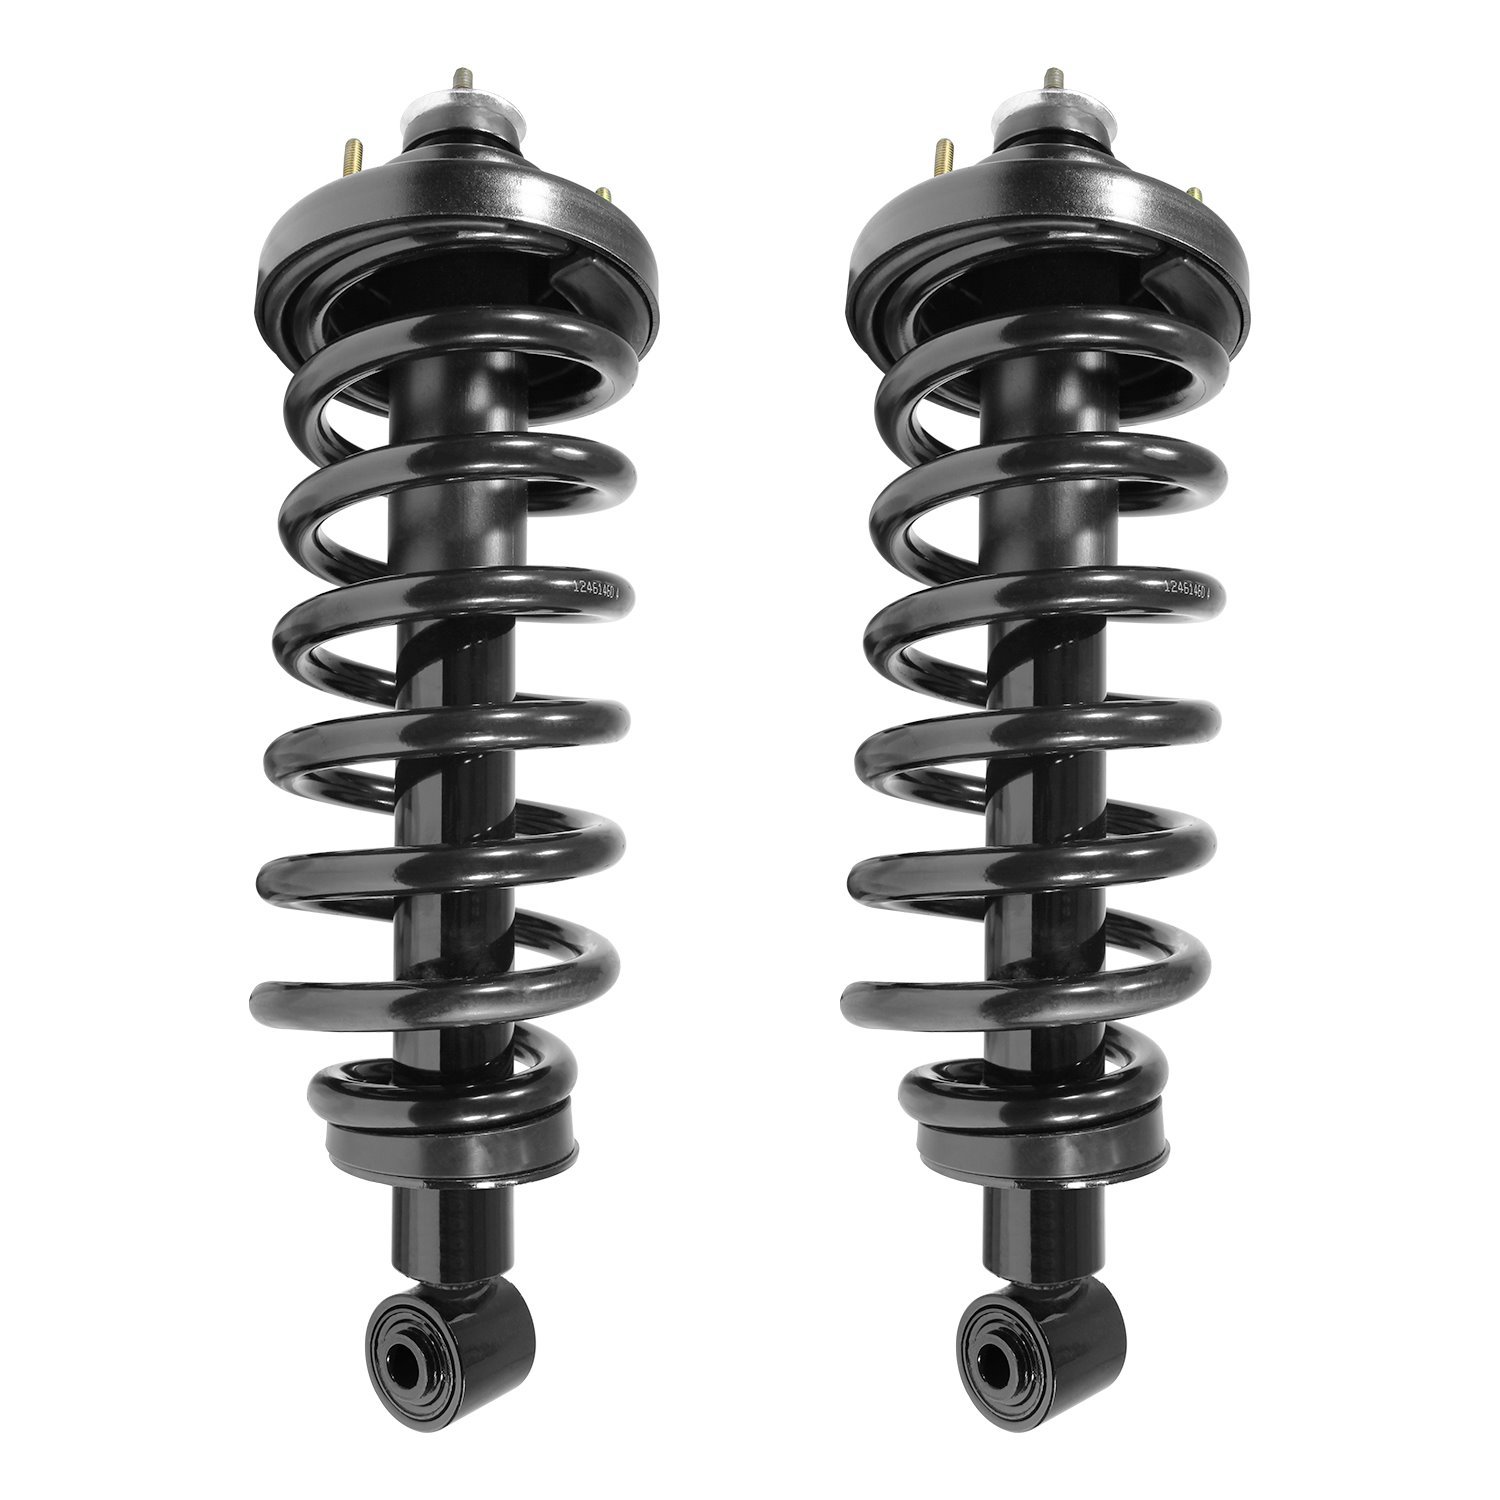 2-15400-001 Suspension Strut & Coil Spring Assembly Set Fits Select Ford Explorer, Mercury Mountaineer